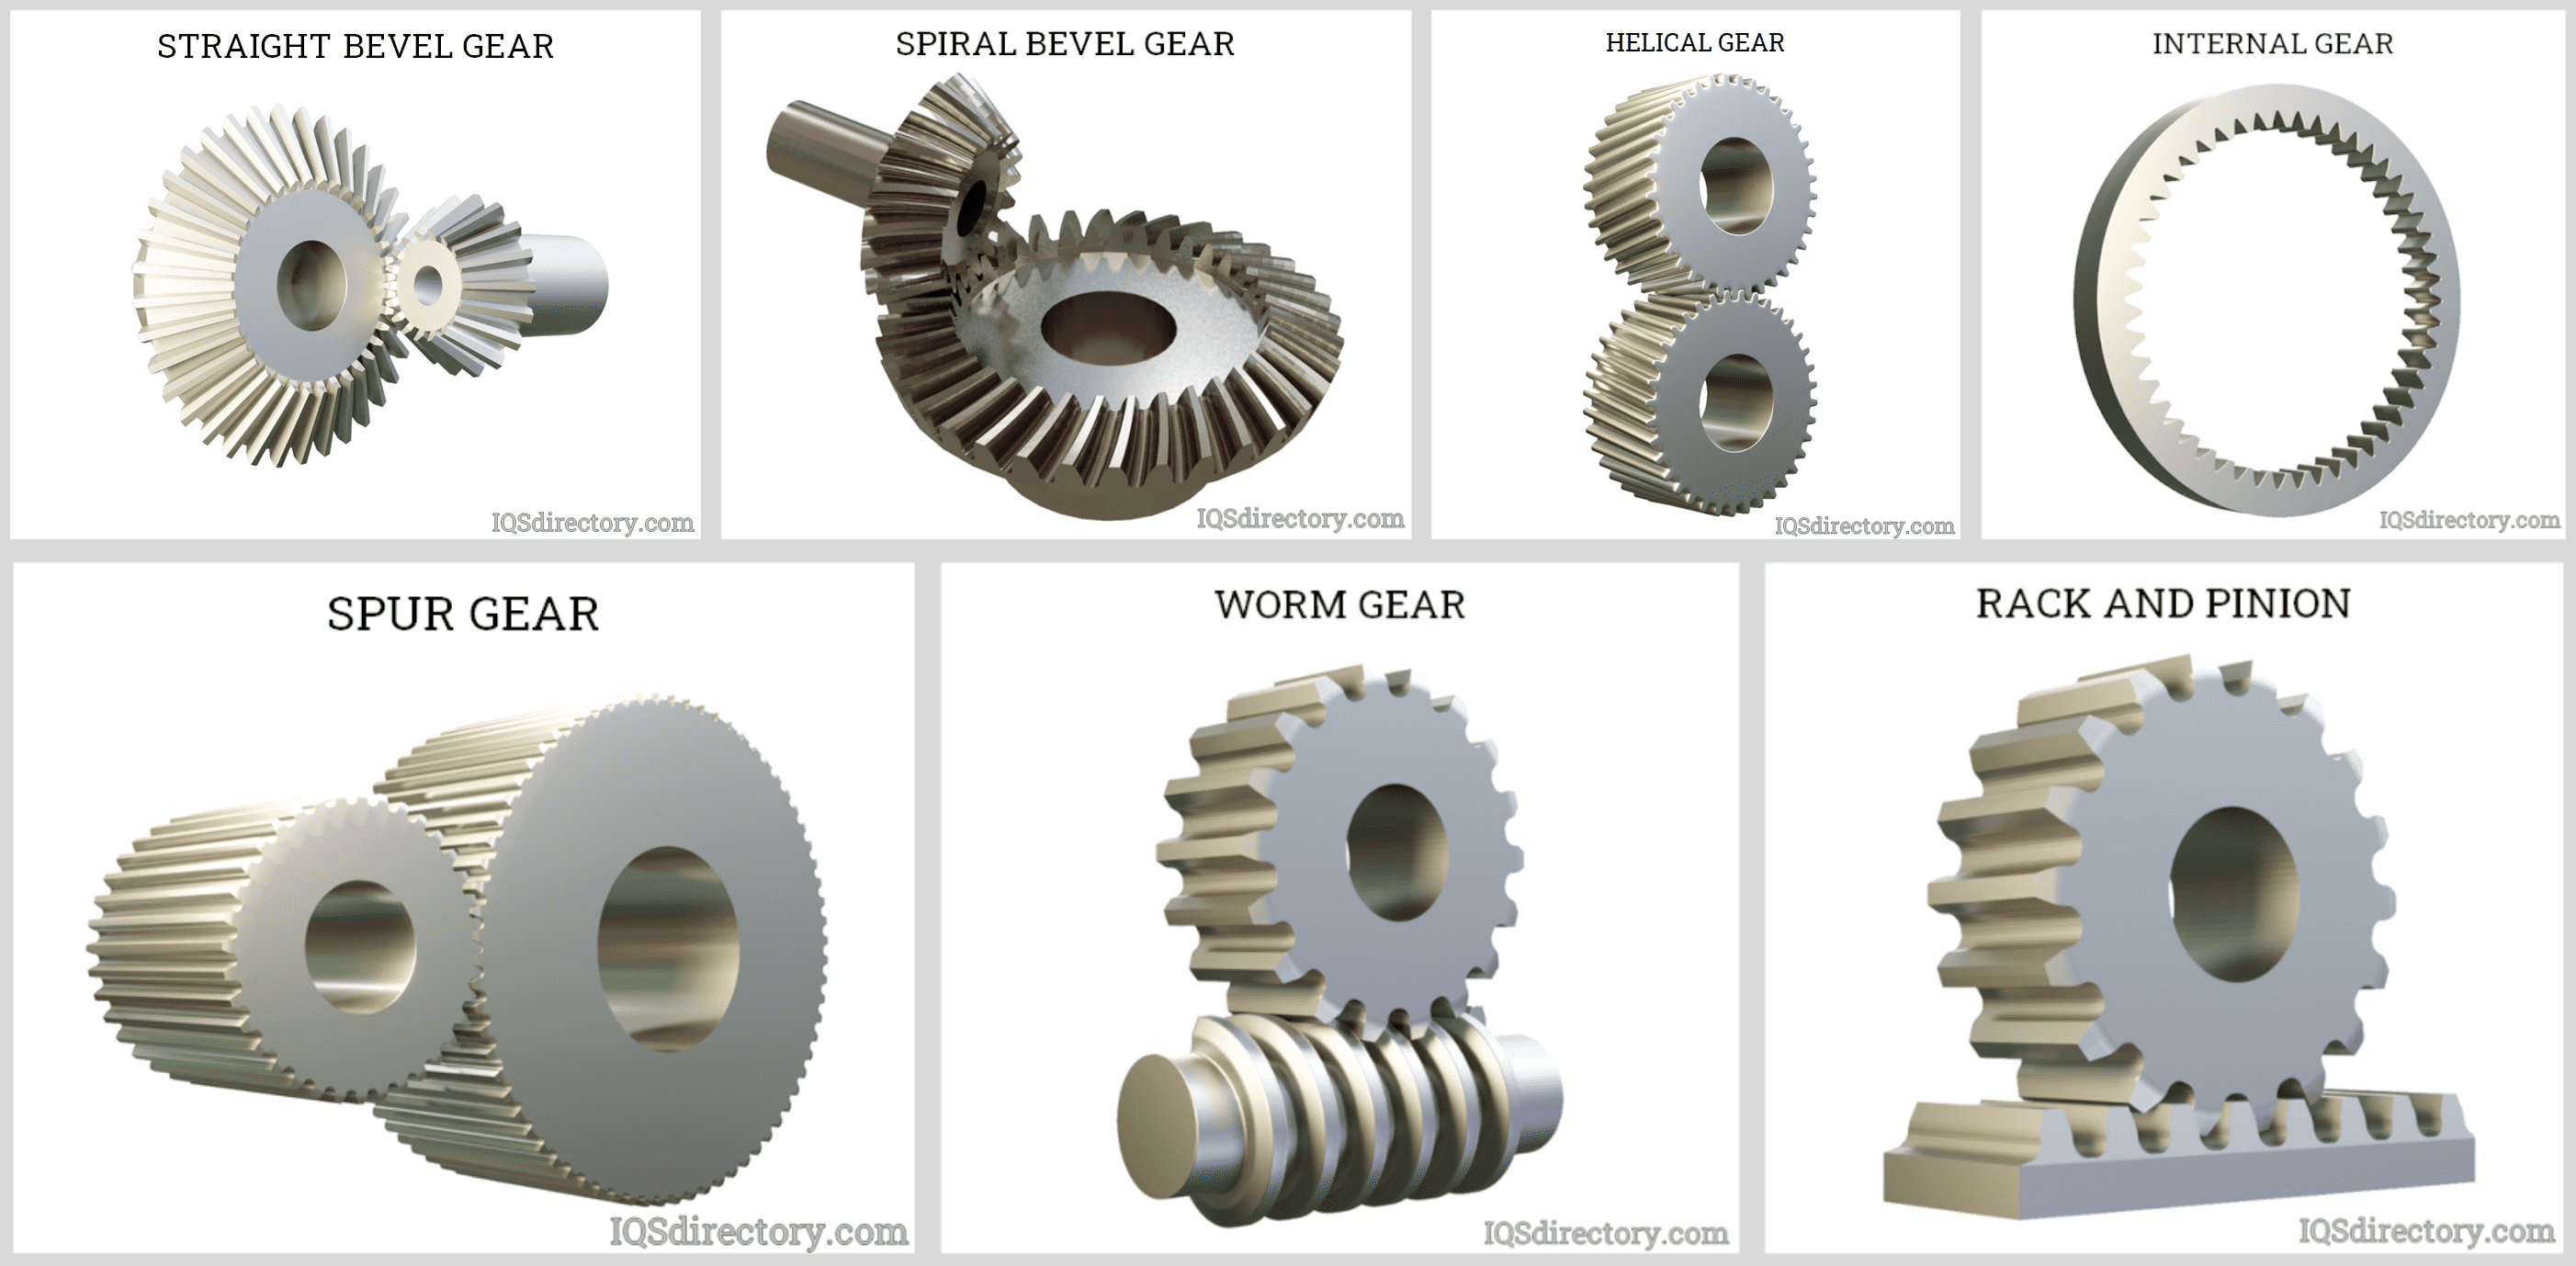 bevel-gear-what-is-it-how-does-it-work-types-uses